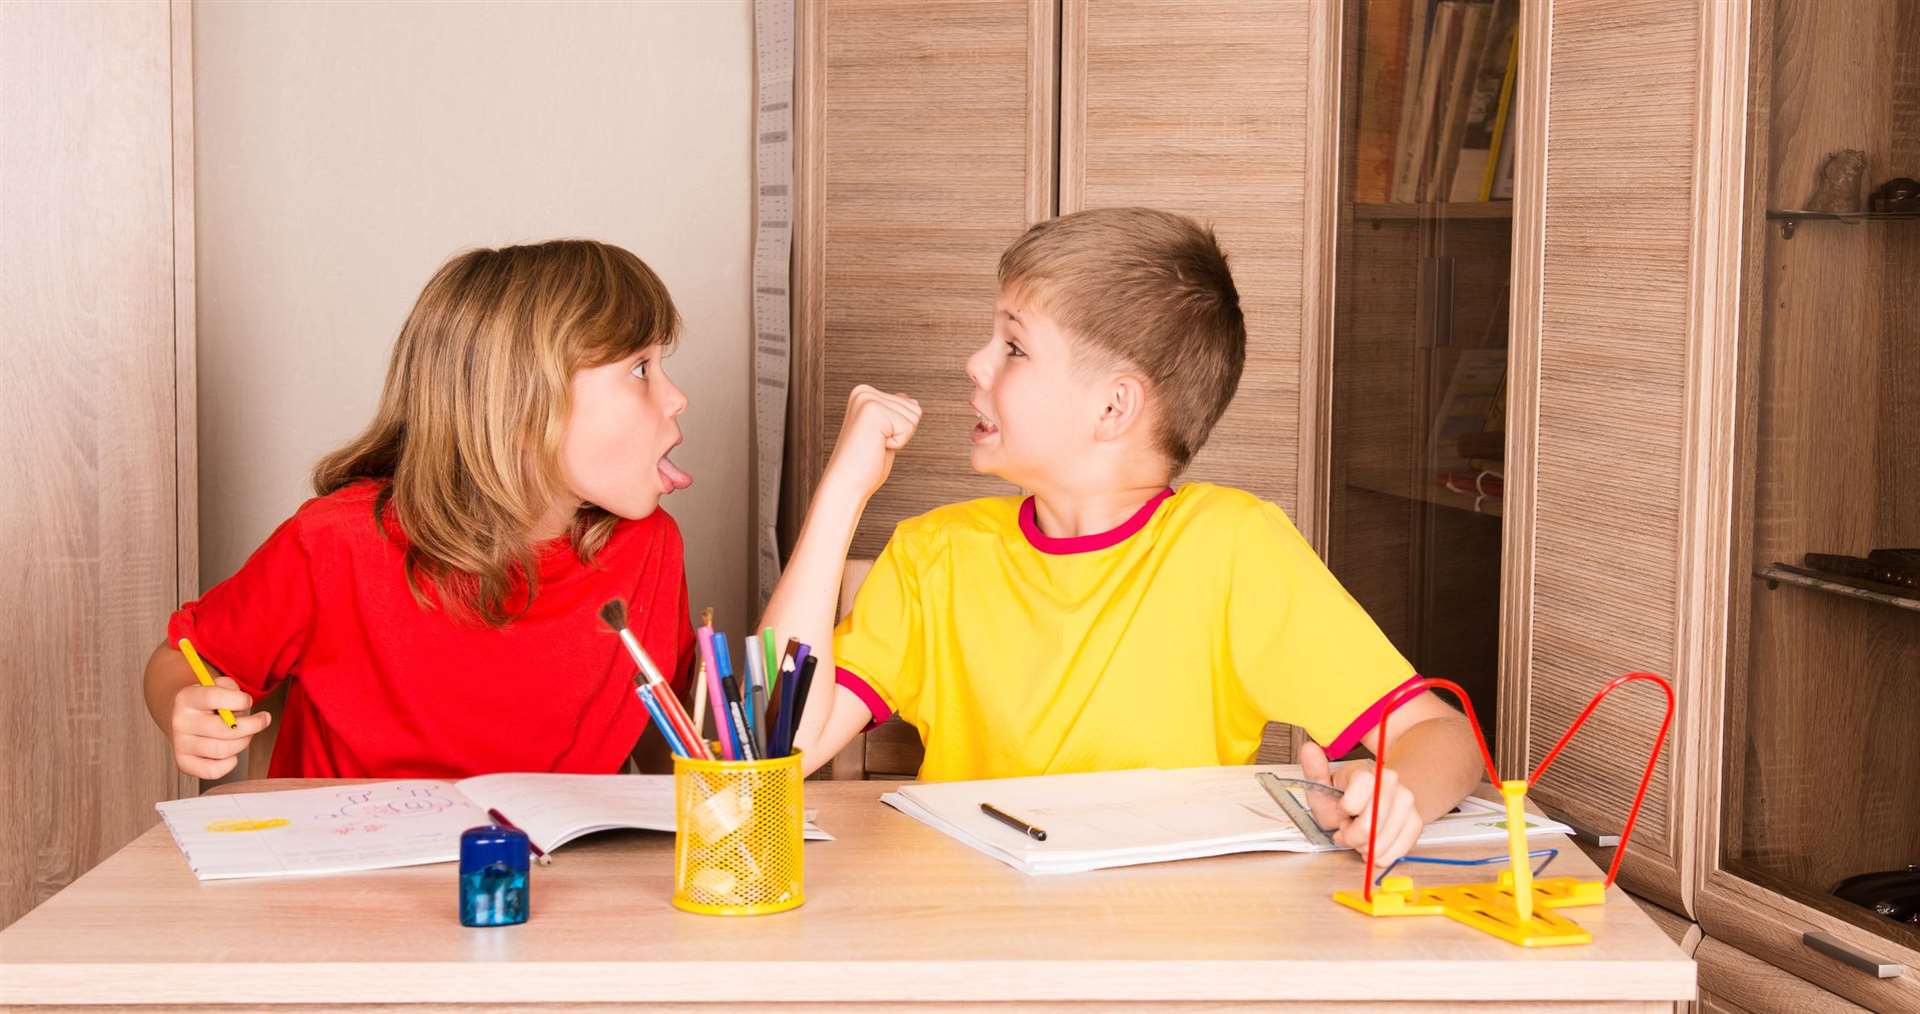 Would your children bicker and argue if left without an adult to manage the situation?